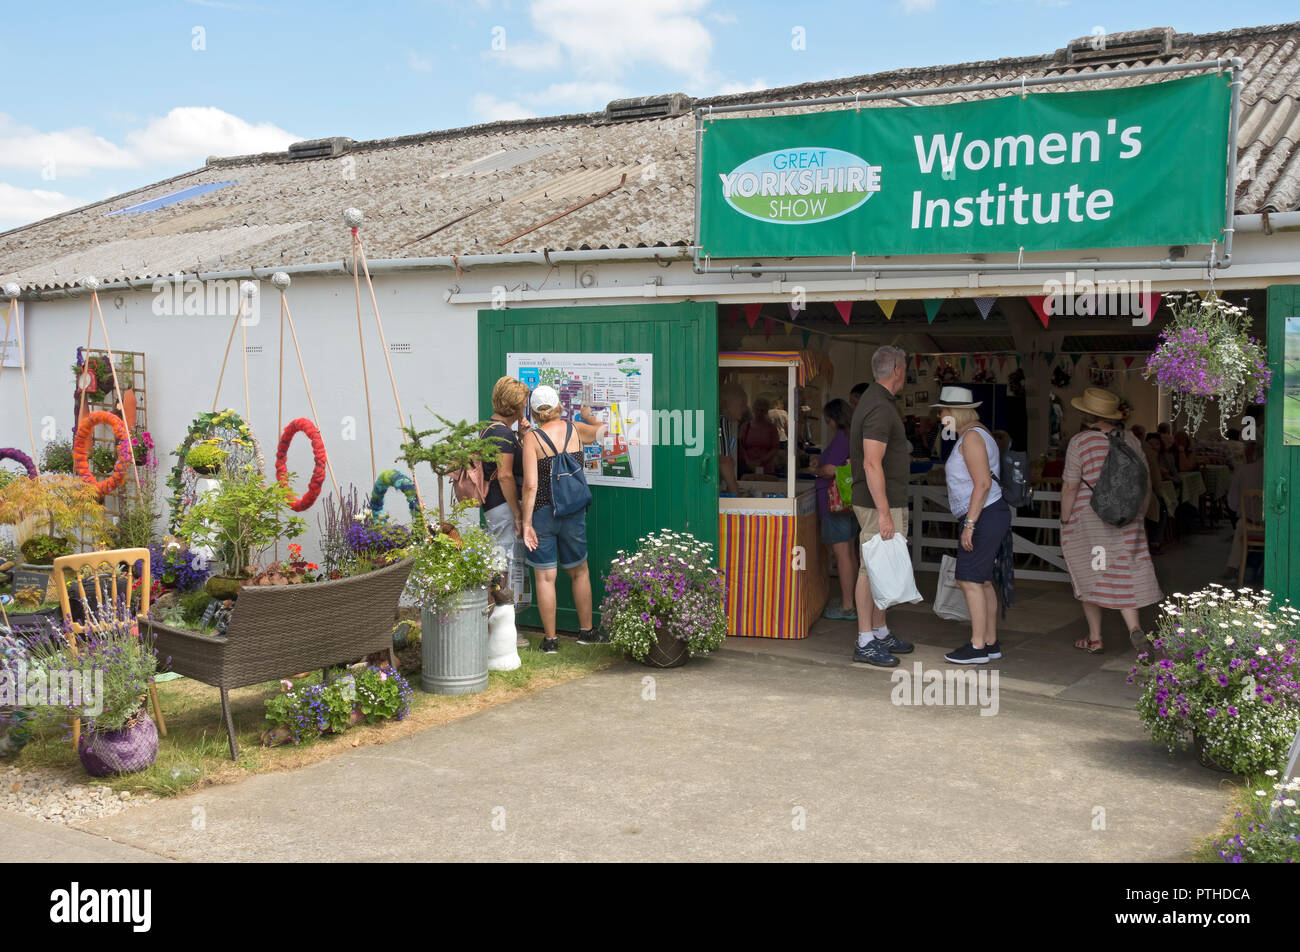 Womens Institute WI pavilion at the Great Yorkshire Show in summer Harrogate North Yorkshire England UK United Kingdom GB Great Britain Stock Photo